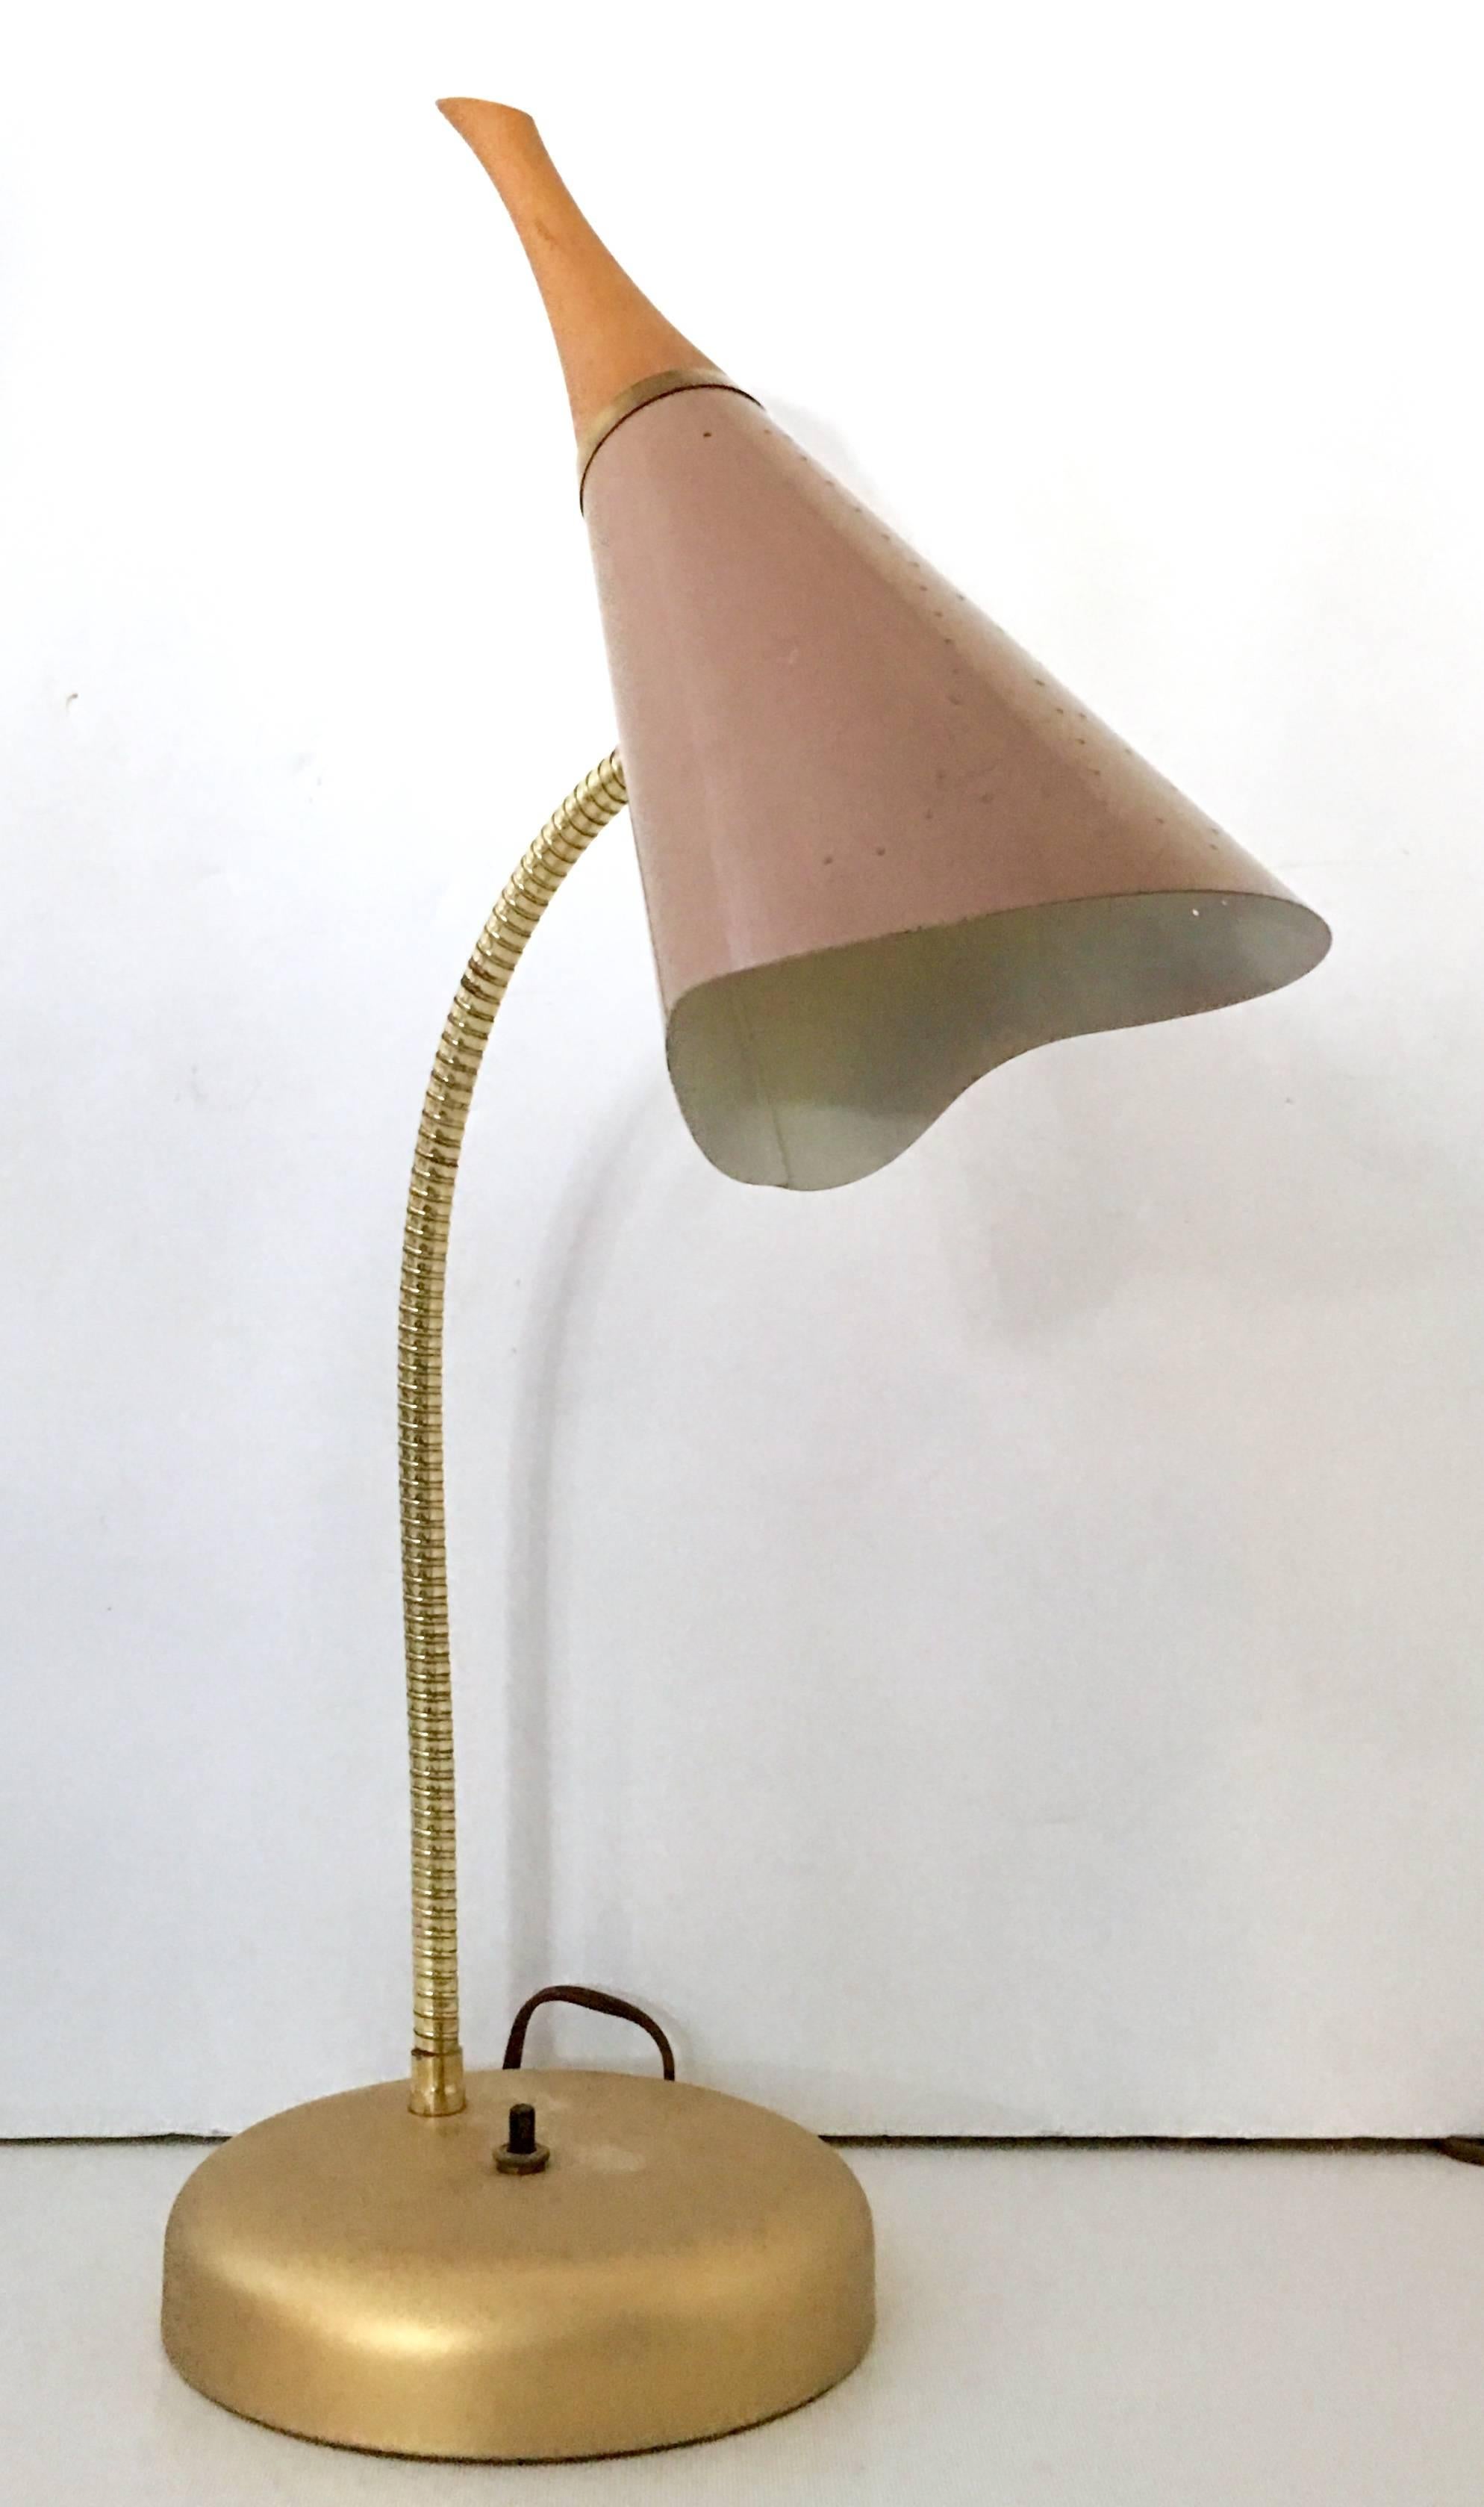 1950s lamps